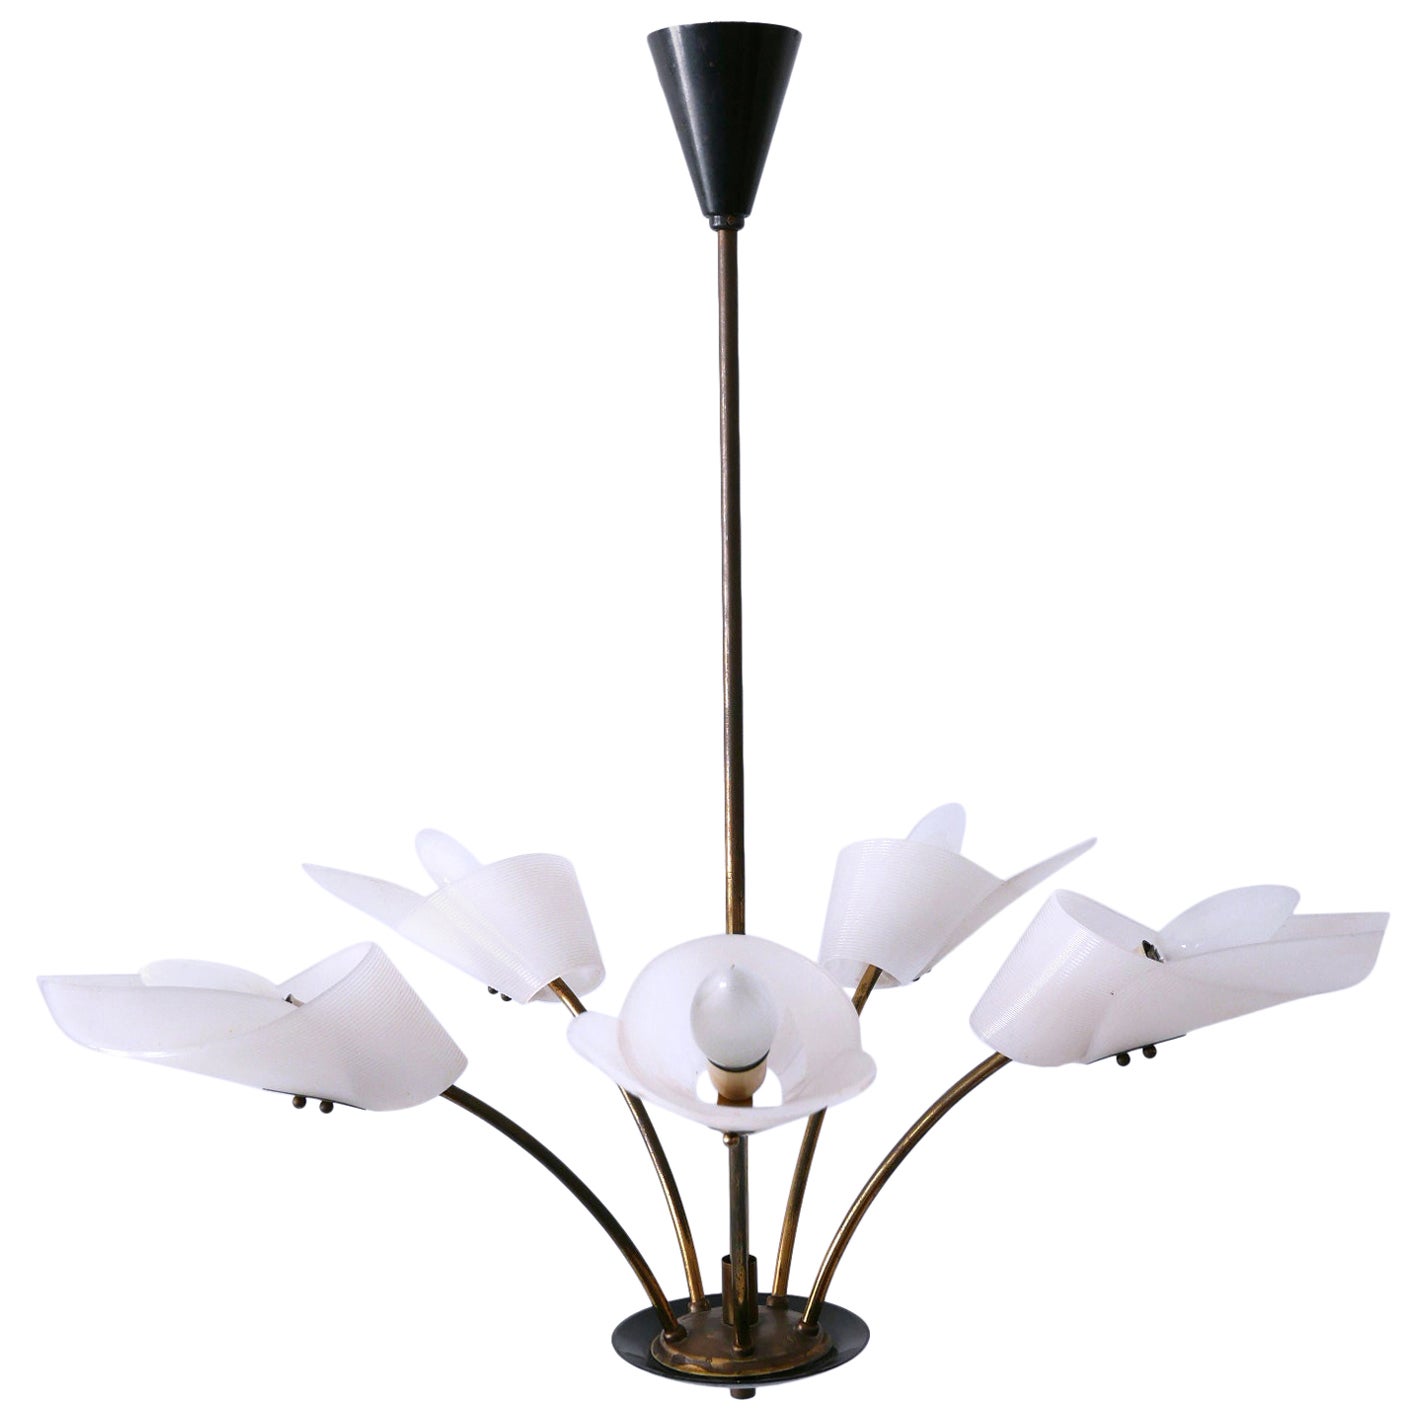 Lovely Mid-Century Modern Fived-Armed Chandelier or Pendant Lamp Germany 1950s